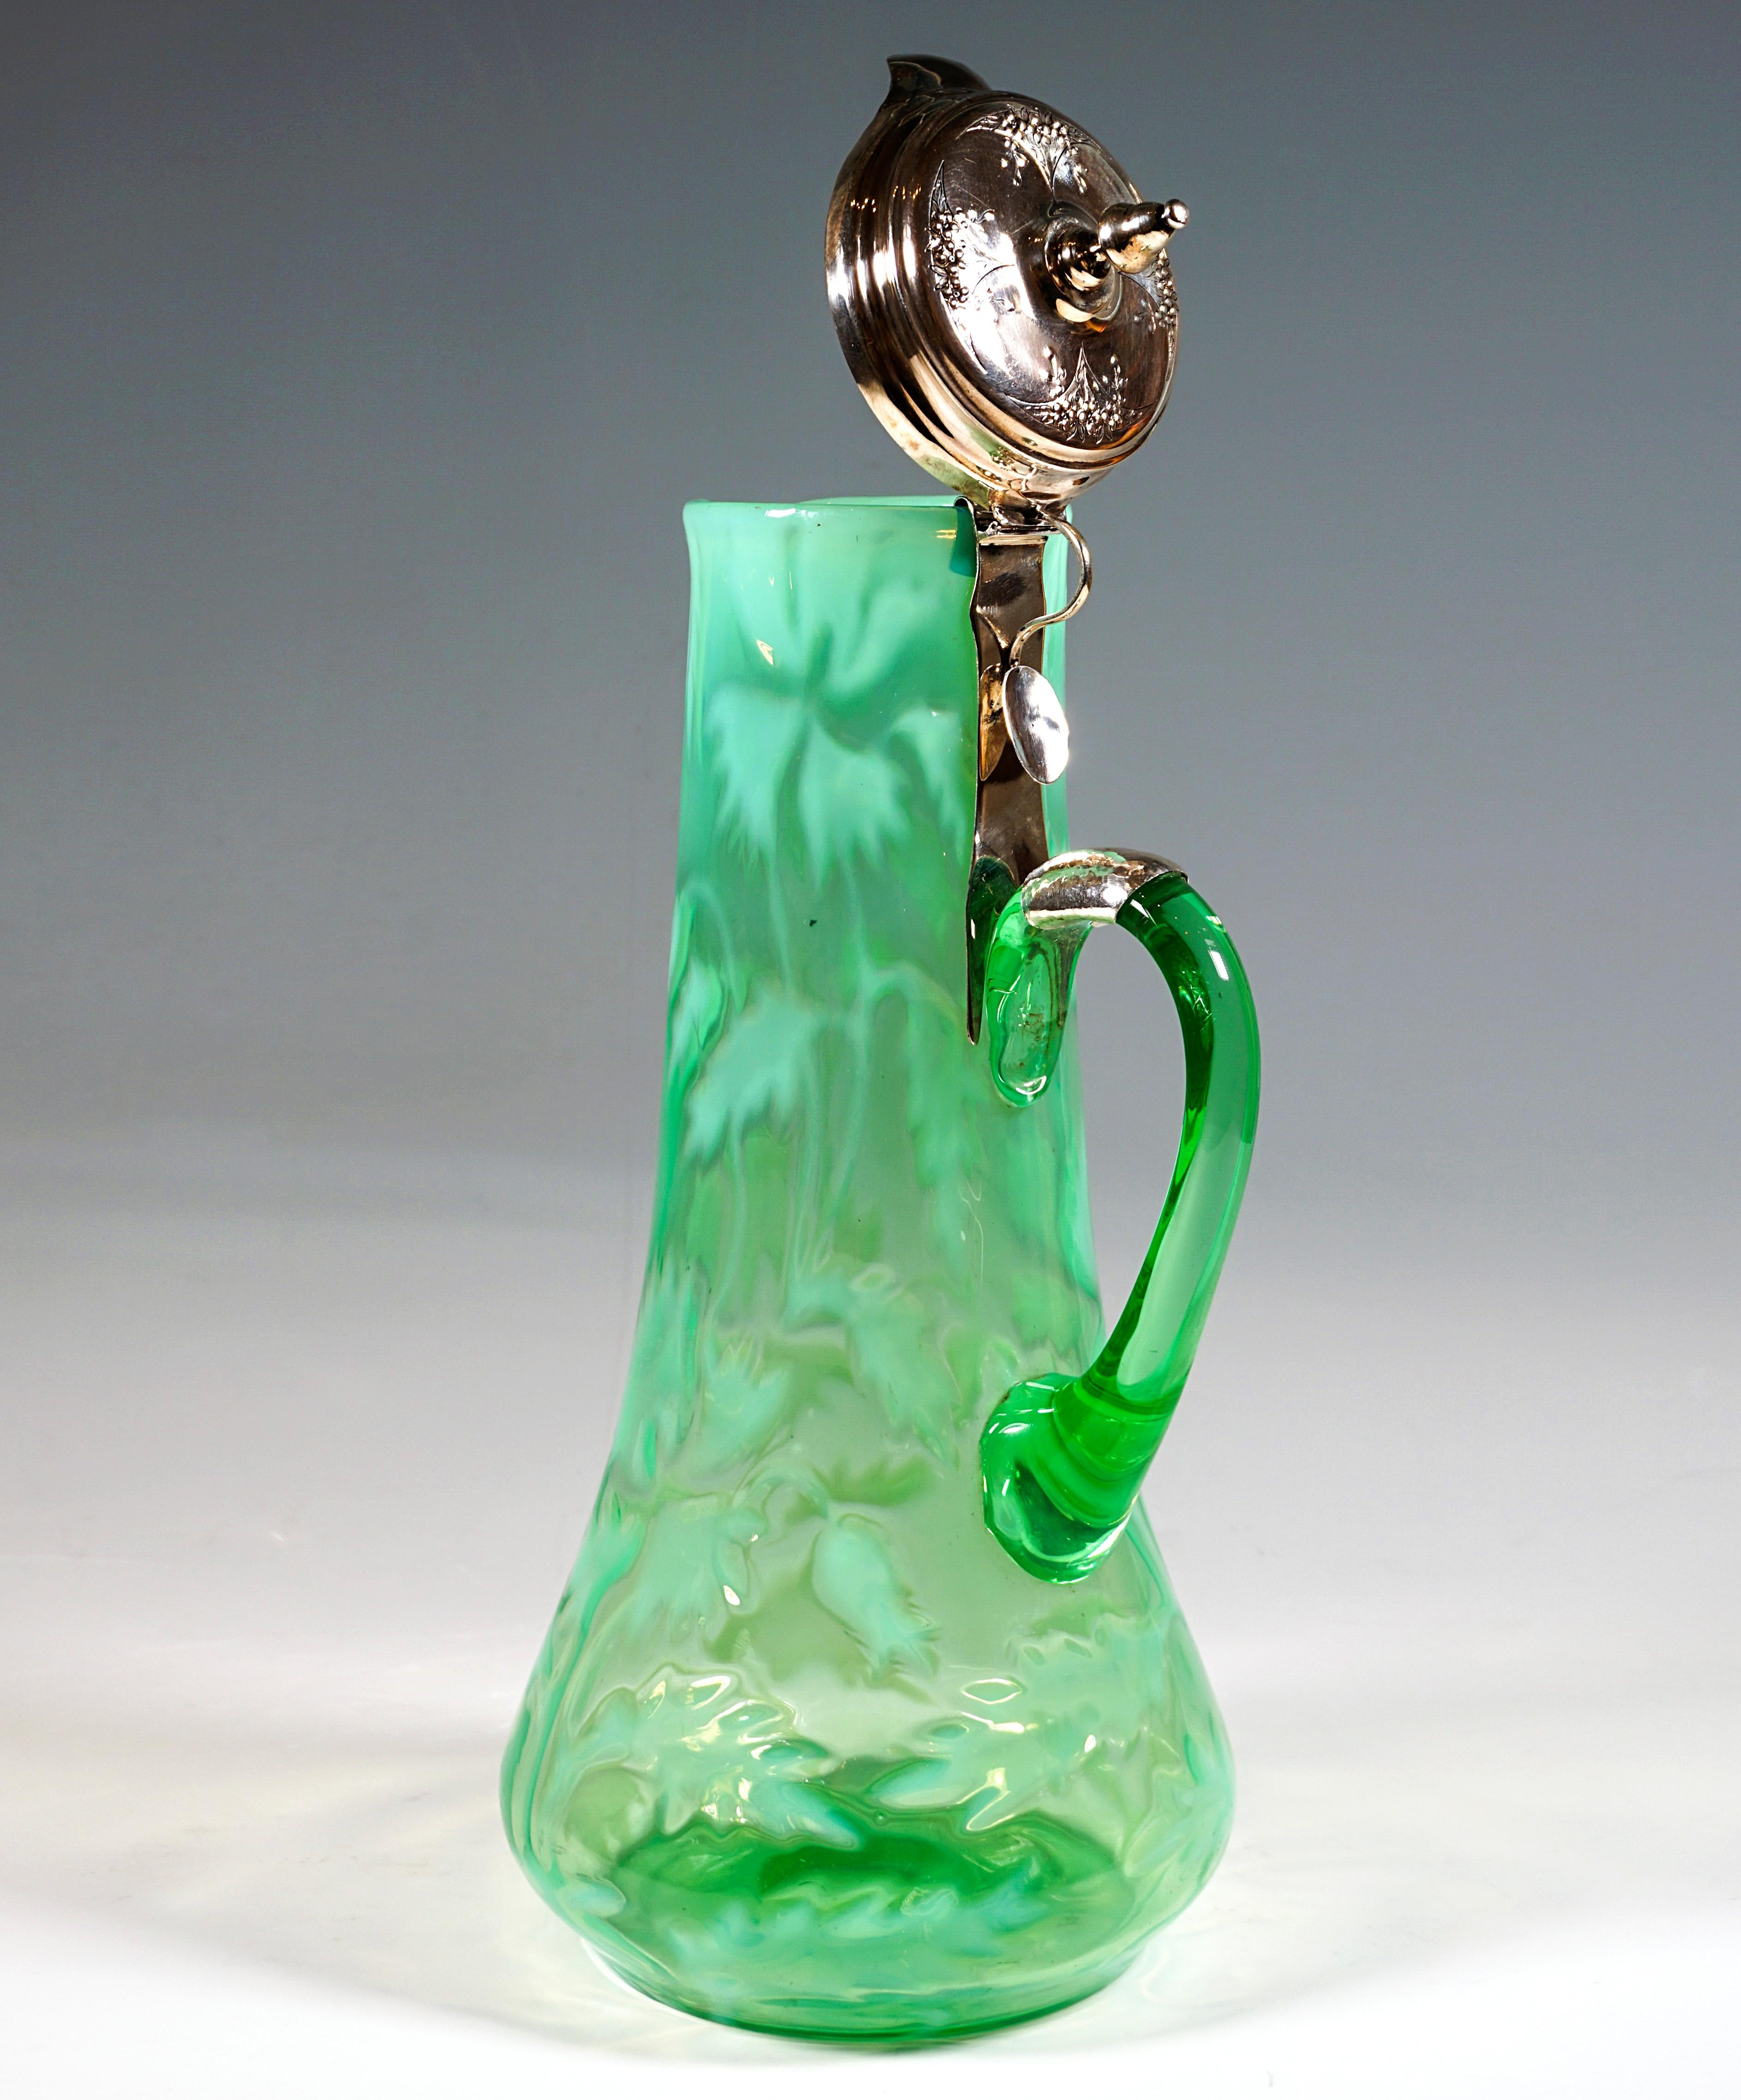 Hand-Crafted Art Nouveau Carafe, Green Glass with Opaline & Silver Mount, Porto, Around 1900 For Sale